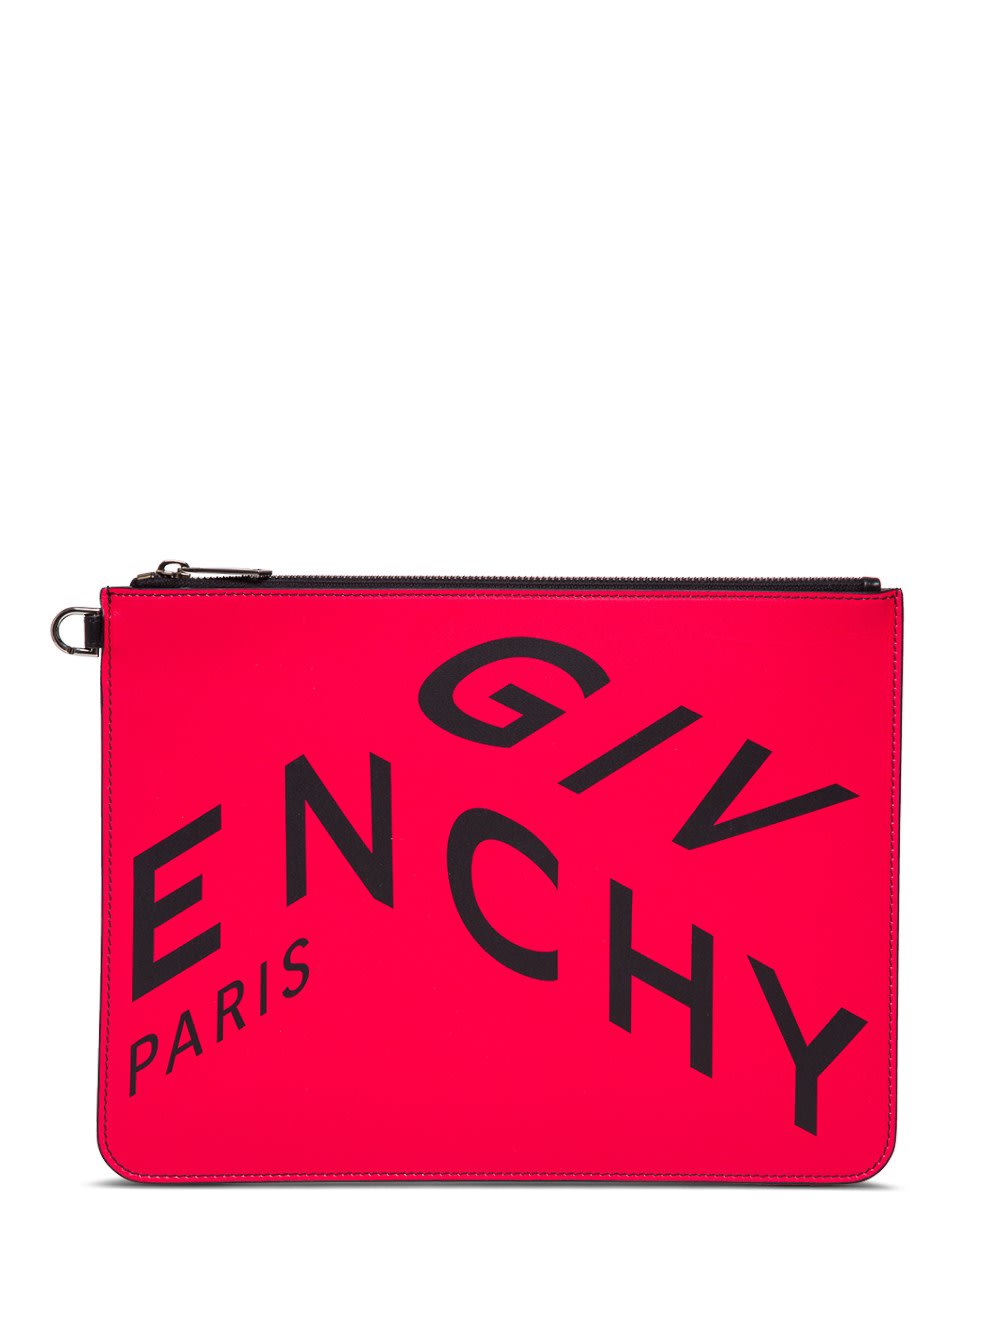 Givenchy Fragment Clutch In Leather With Contrasting Logo Print